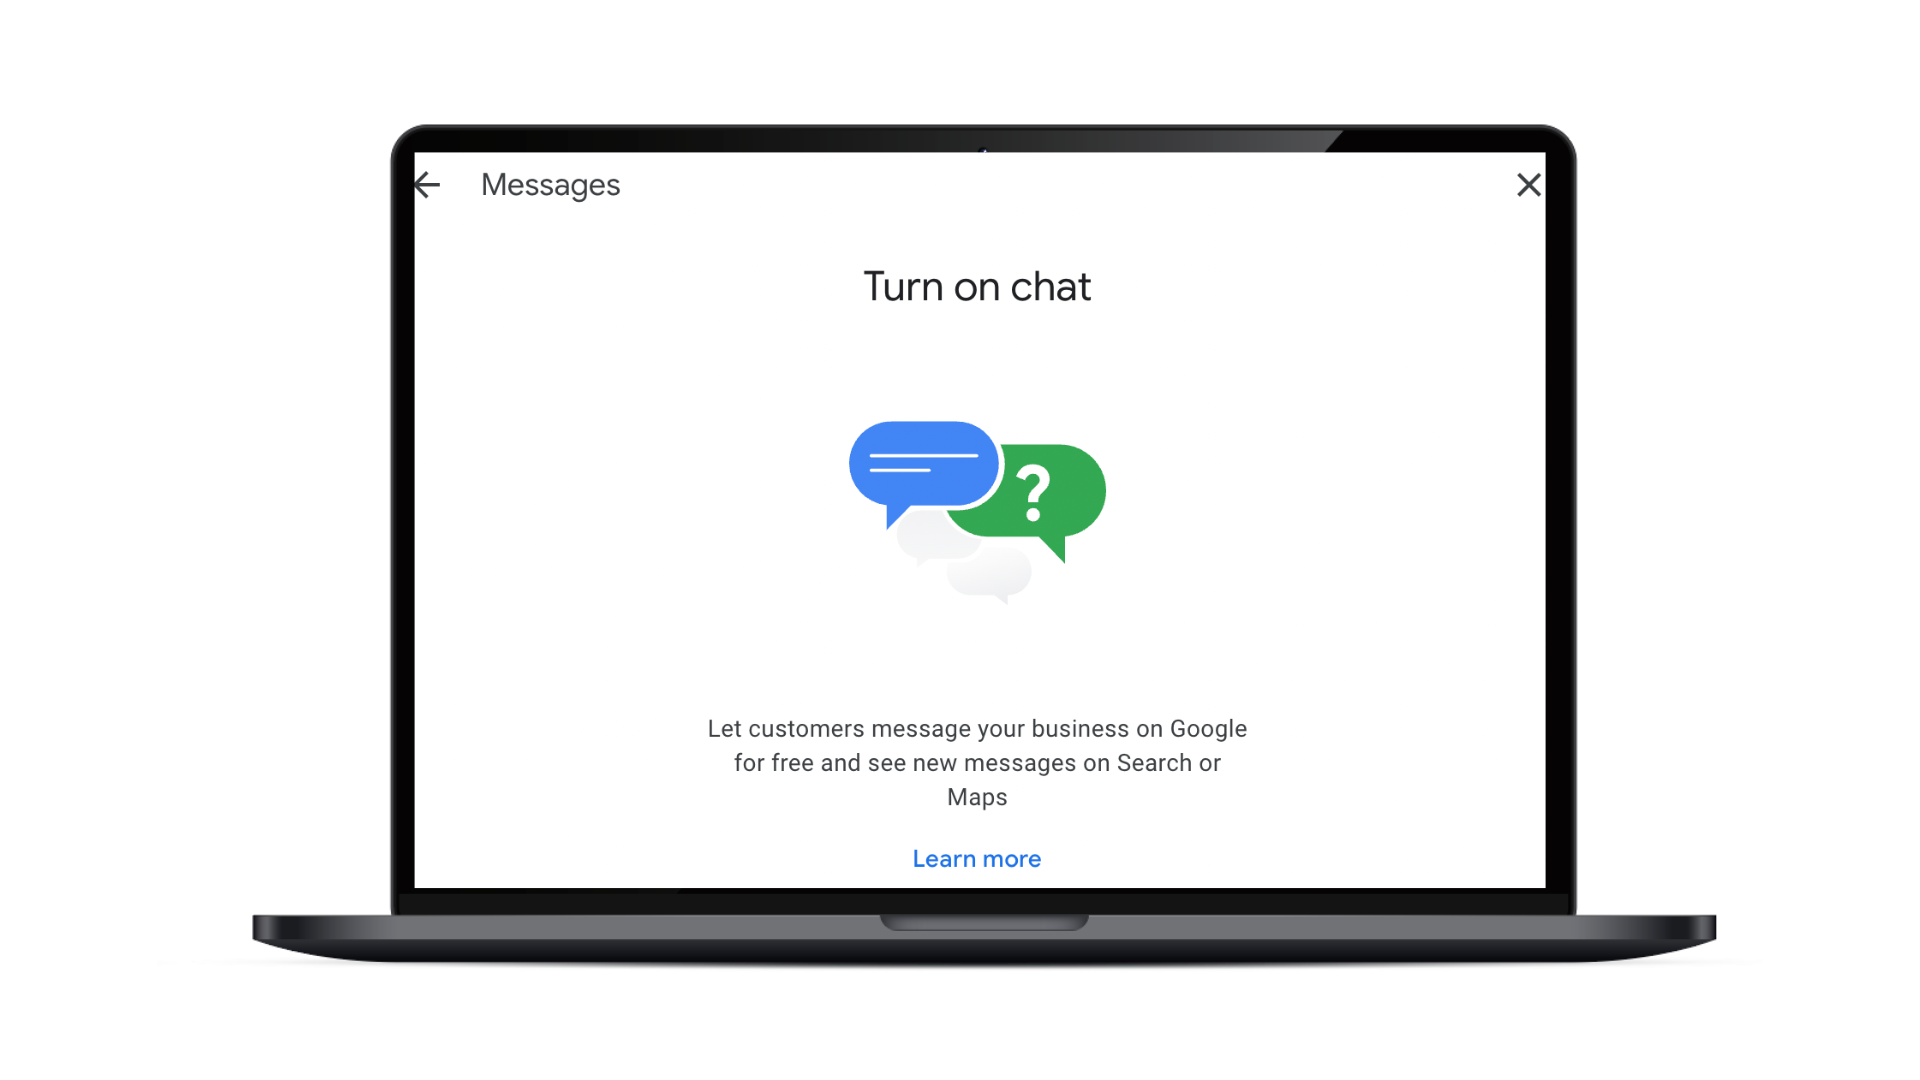 An image showing the option to turn on your chat with Google Business Messages